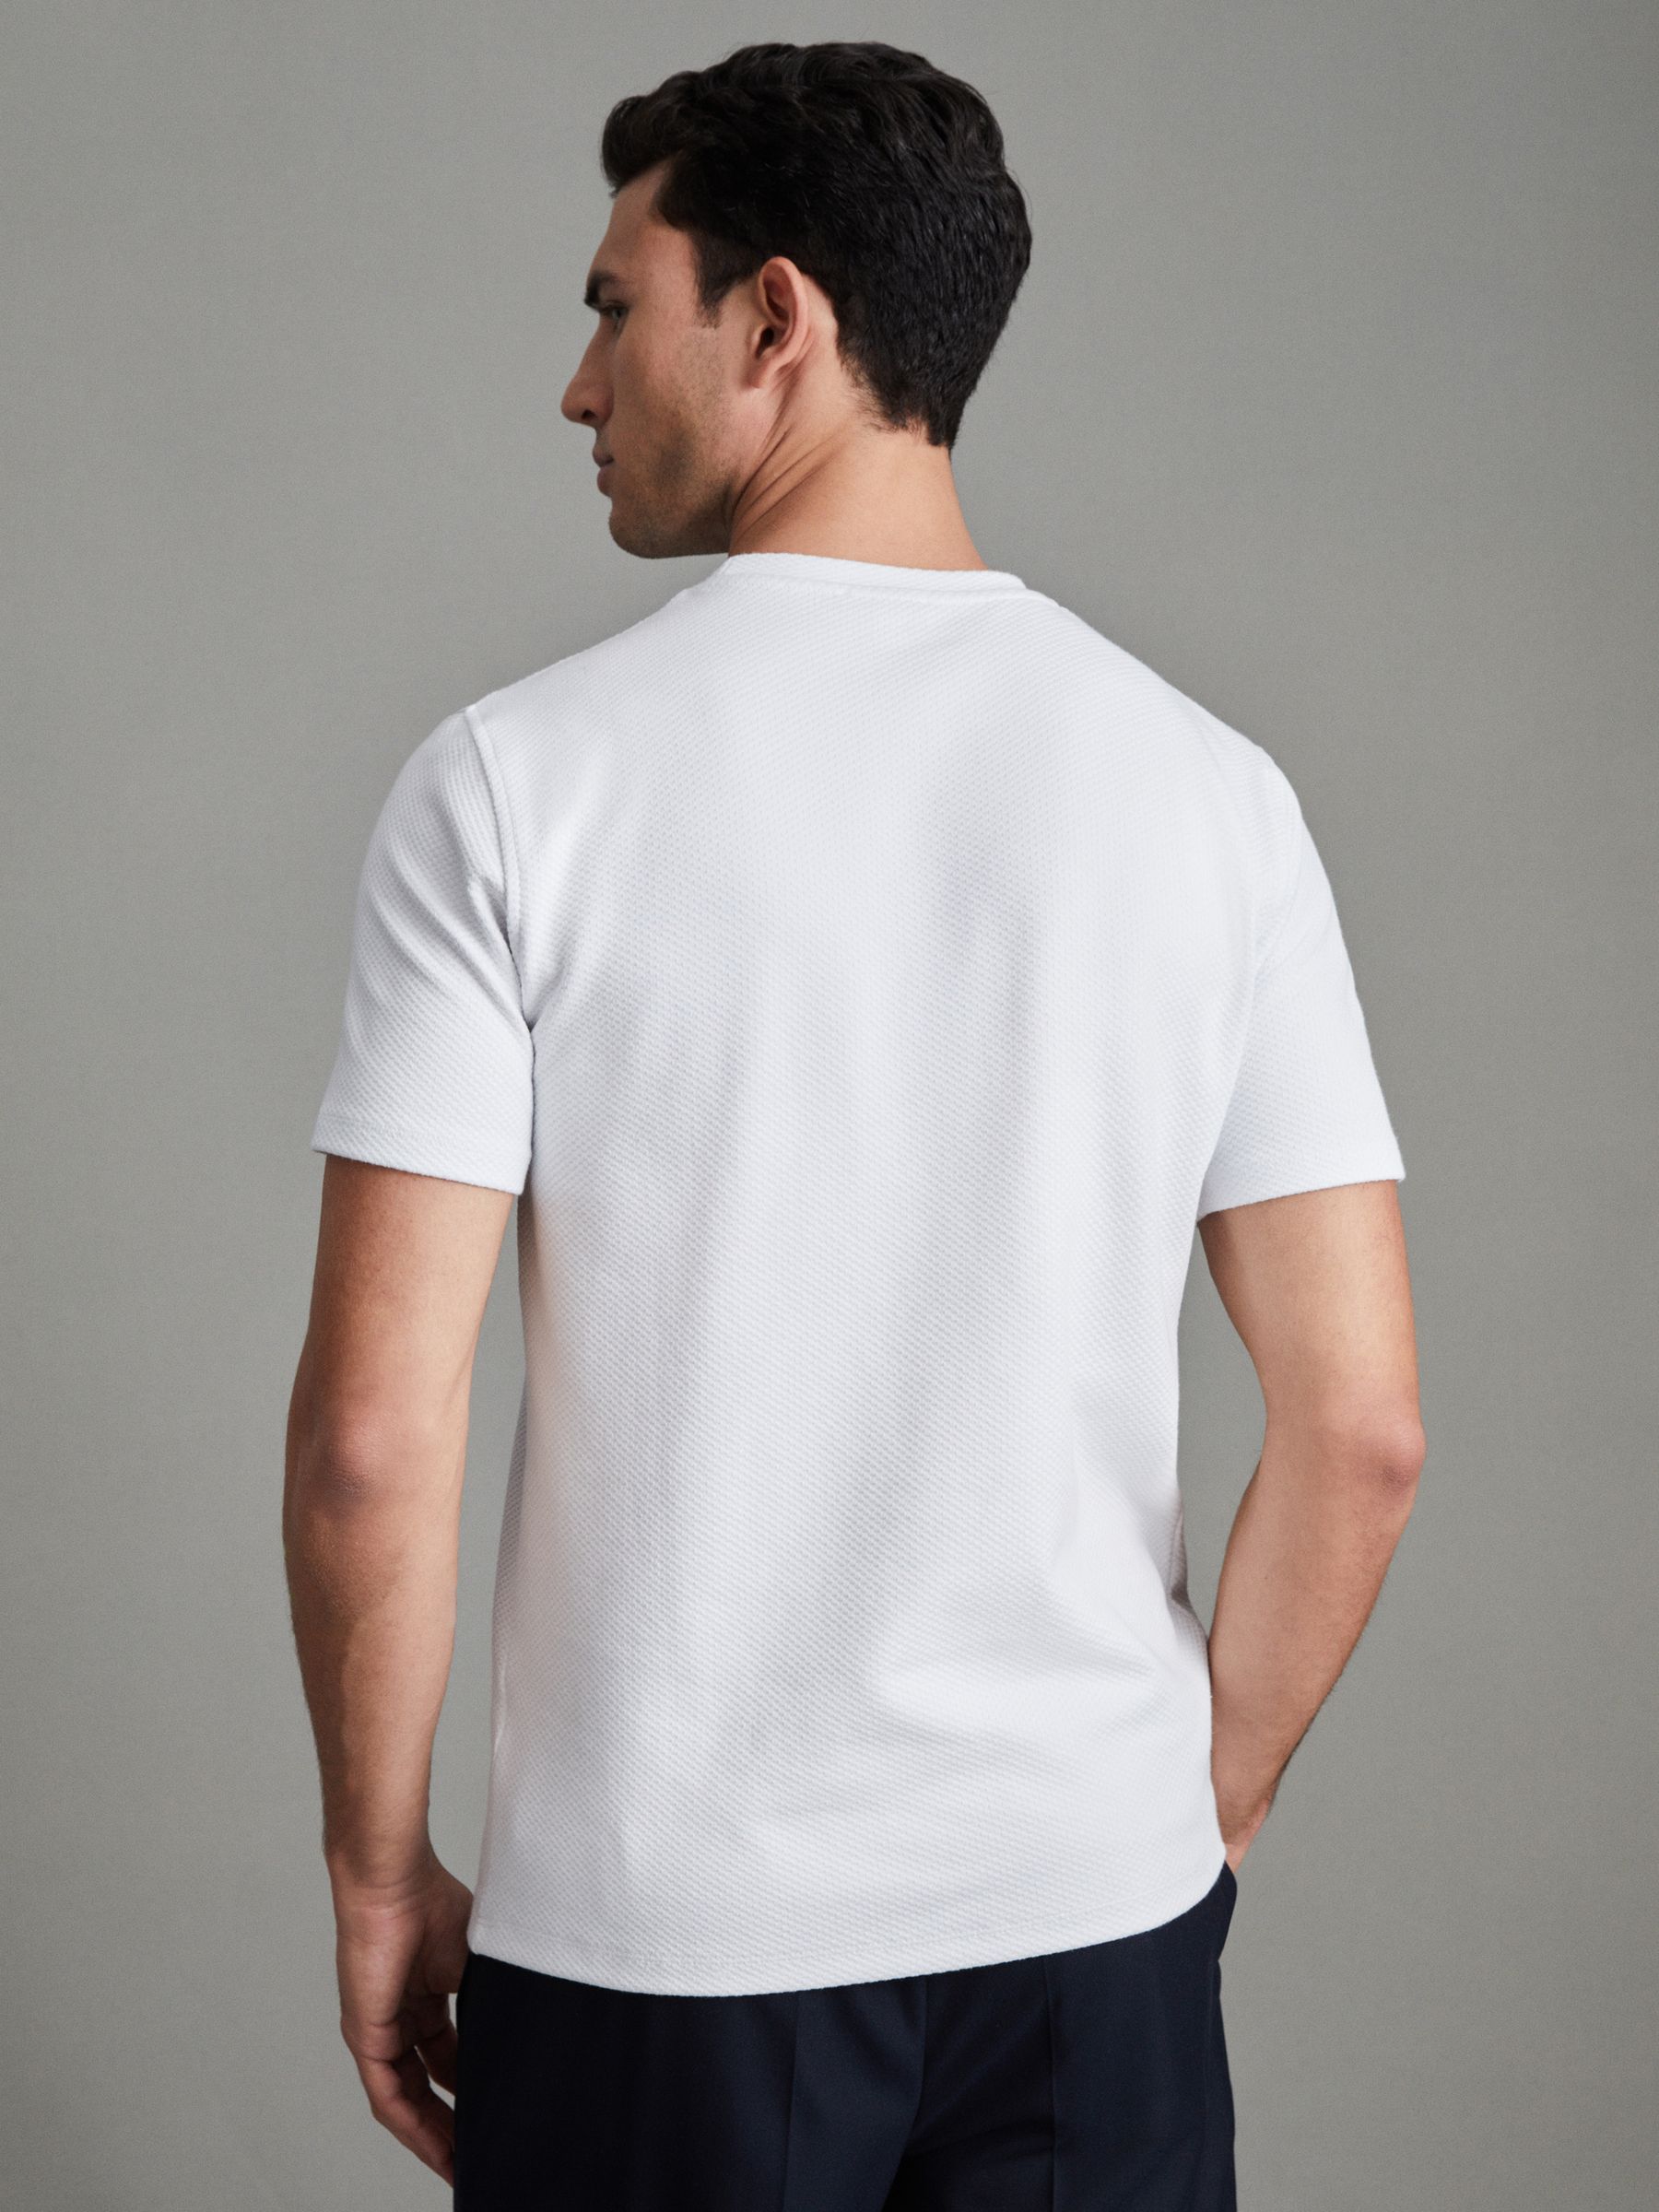 Slim Fit Honeycomb T-Shirt in White - REISS